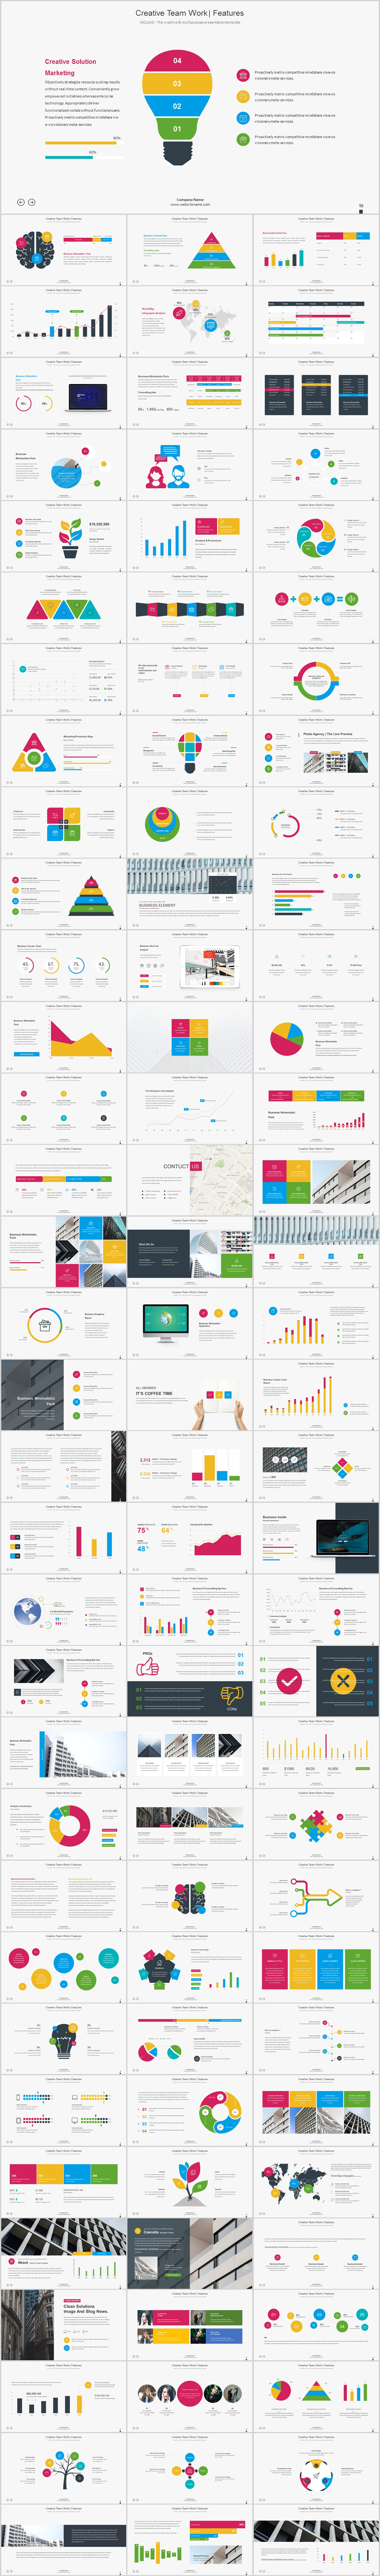 ultimate infographics creative powerpoint templates www.pptwork.com